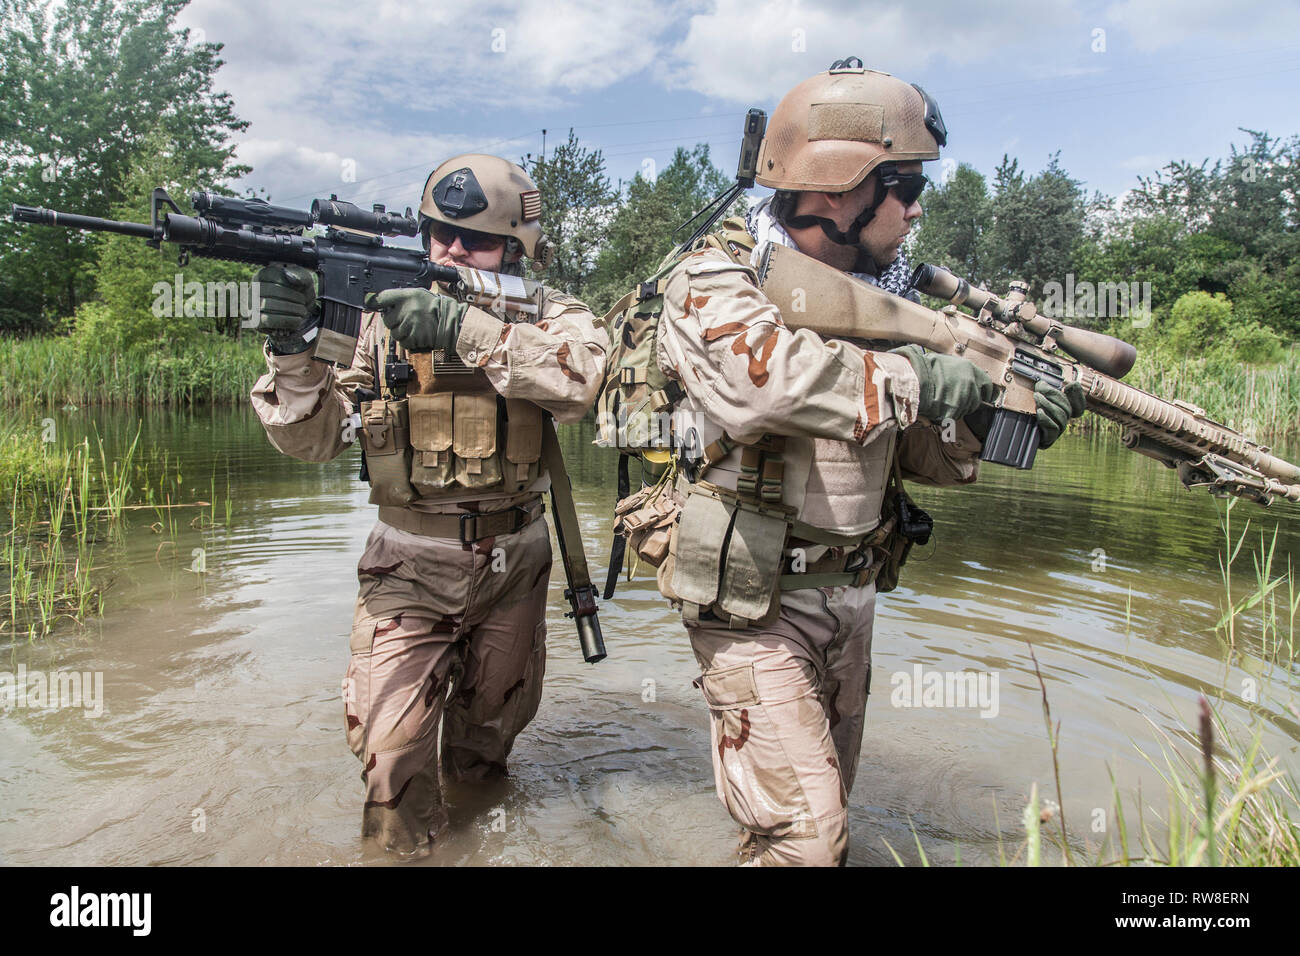 Navy SEALs crossing the river with weapons. Stock Photo